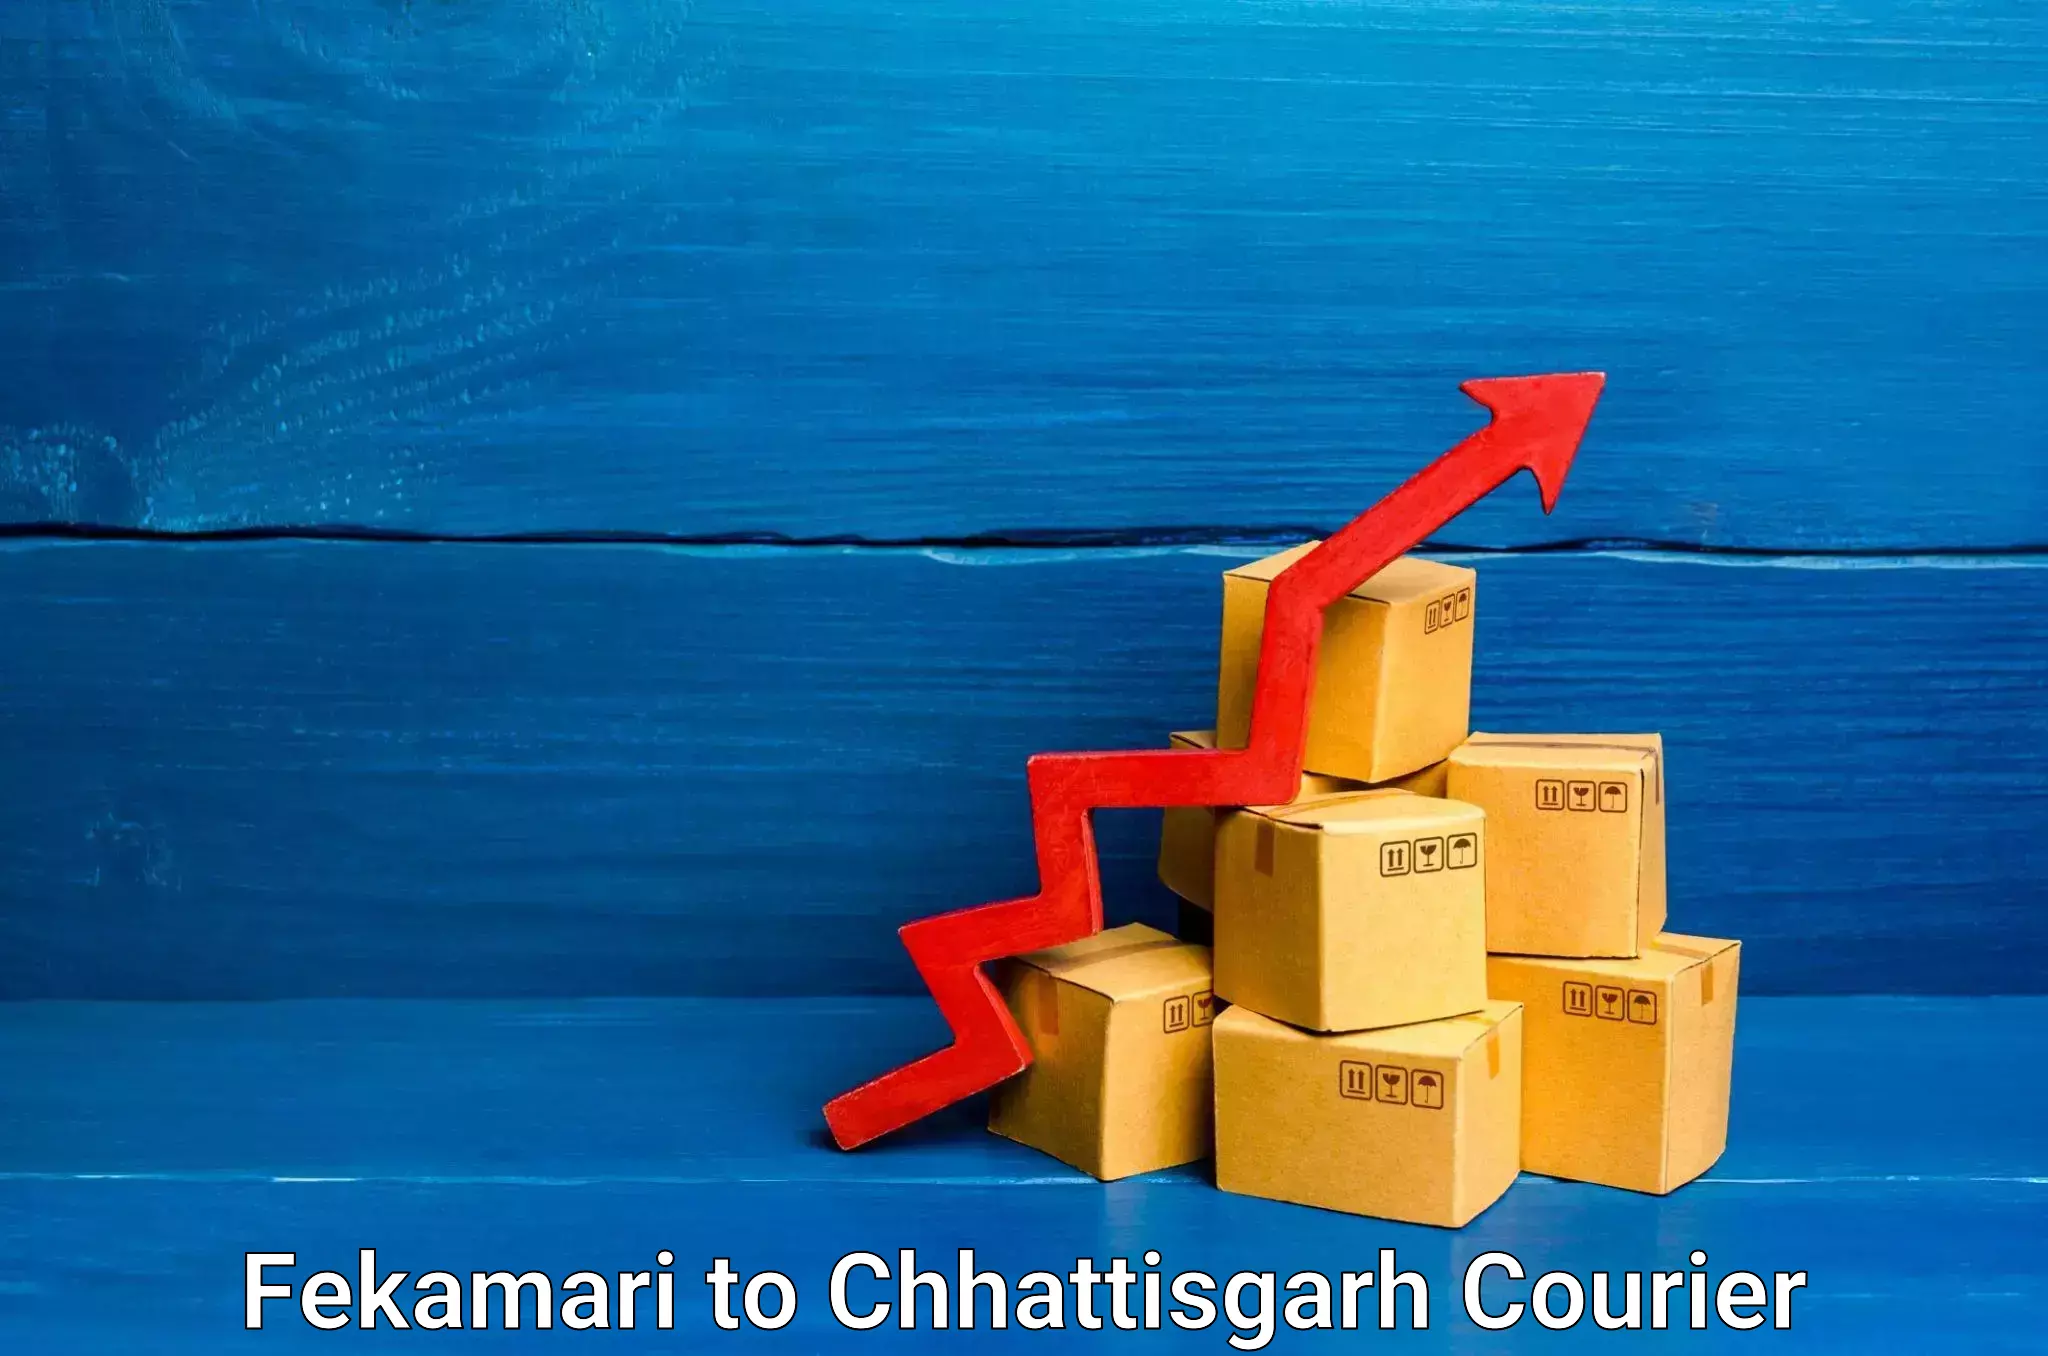 Full-service courier options Fekamari to Narayanpur